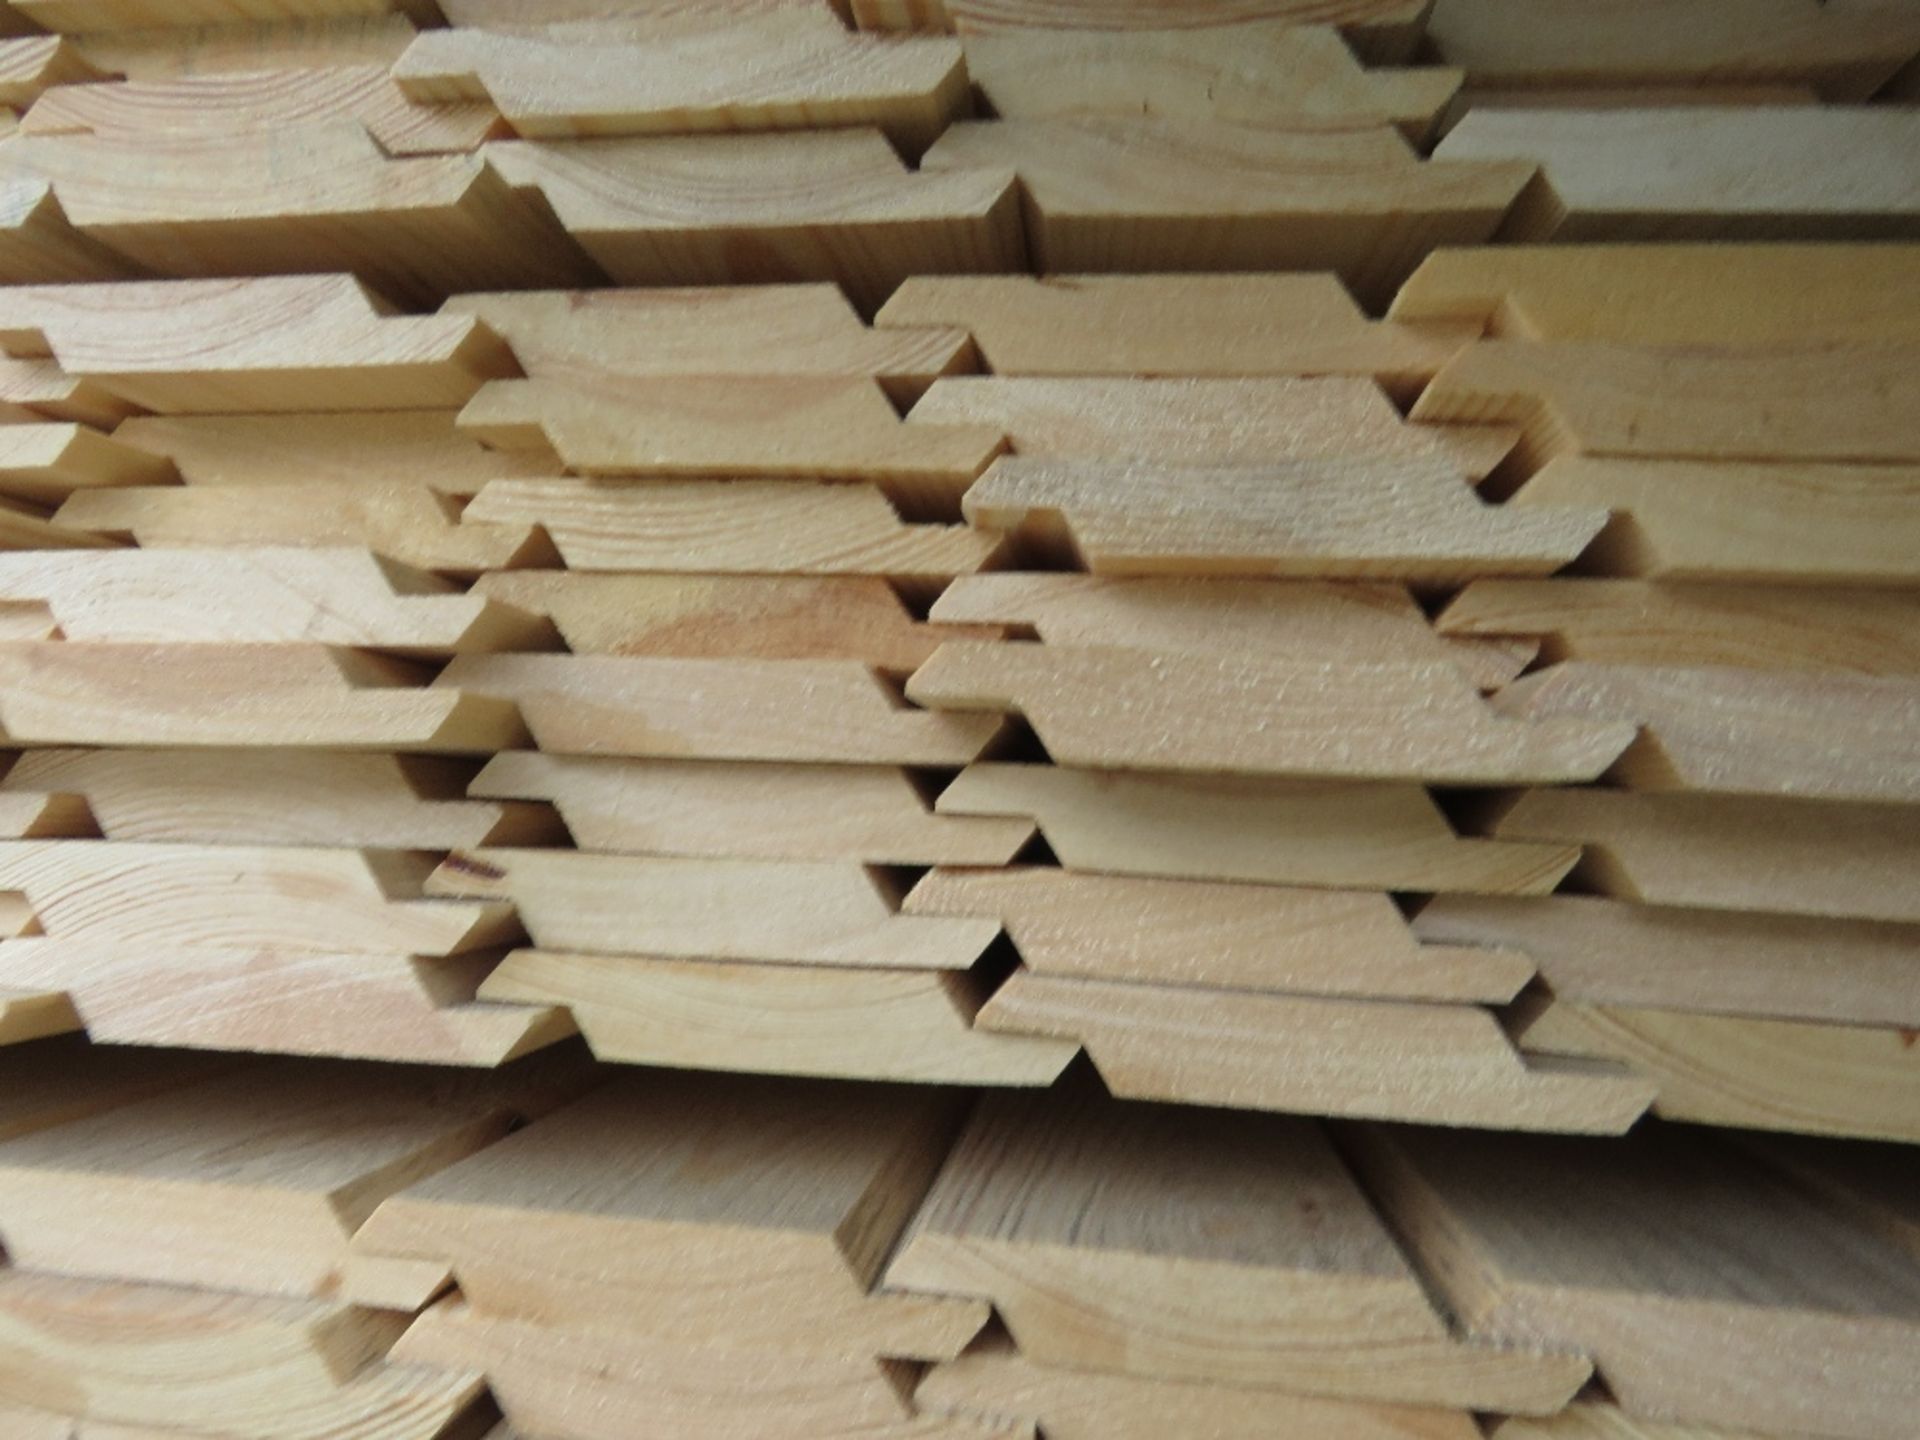 EXTRA LARGE PACK OF UNTREATED SHIPLAP TIMBER CLADDING BOARDS. 1.73M LENGTH X 95MM WIDTH APPROX. - Image 3 of 3